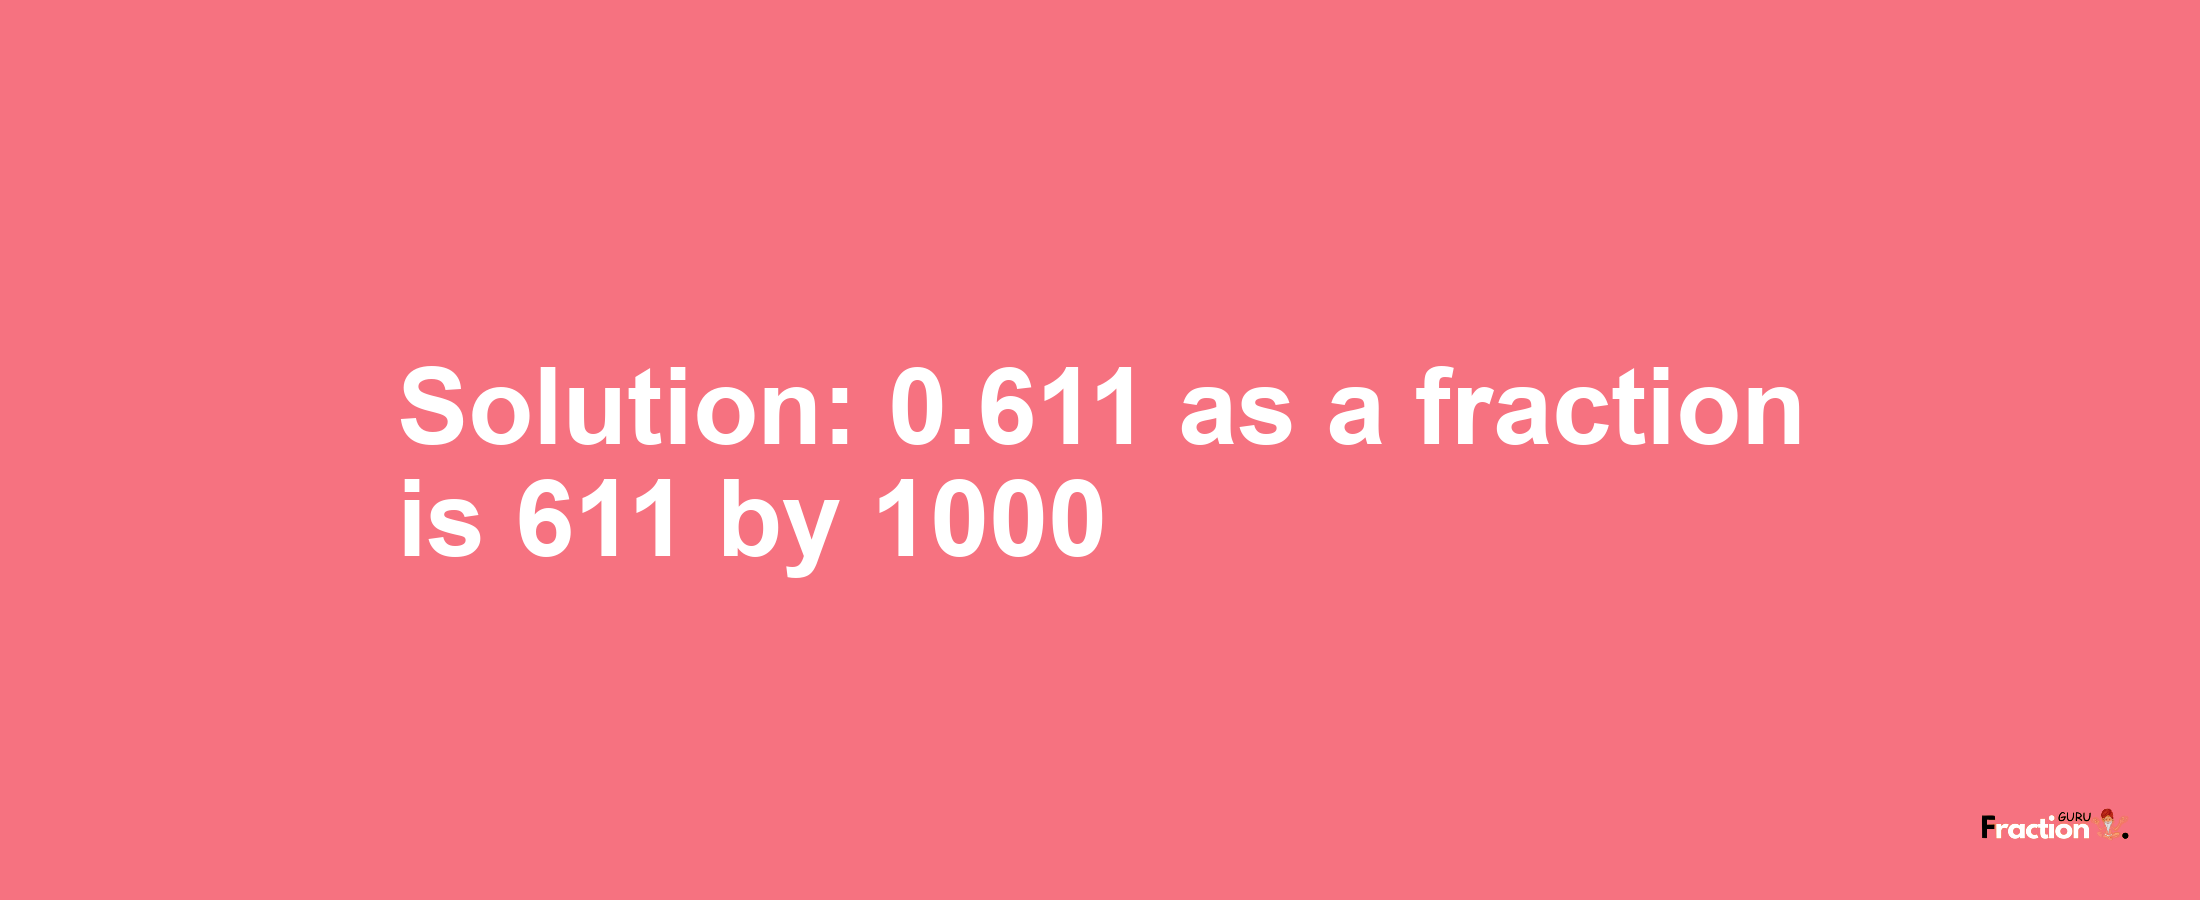 Solution:0.611 as a fraction is 611/1000